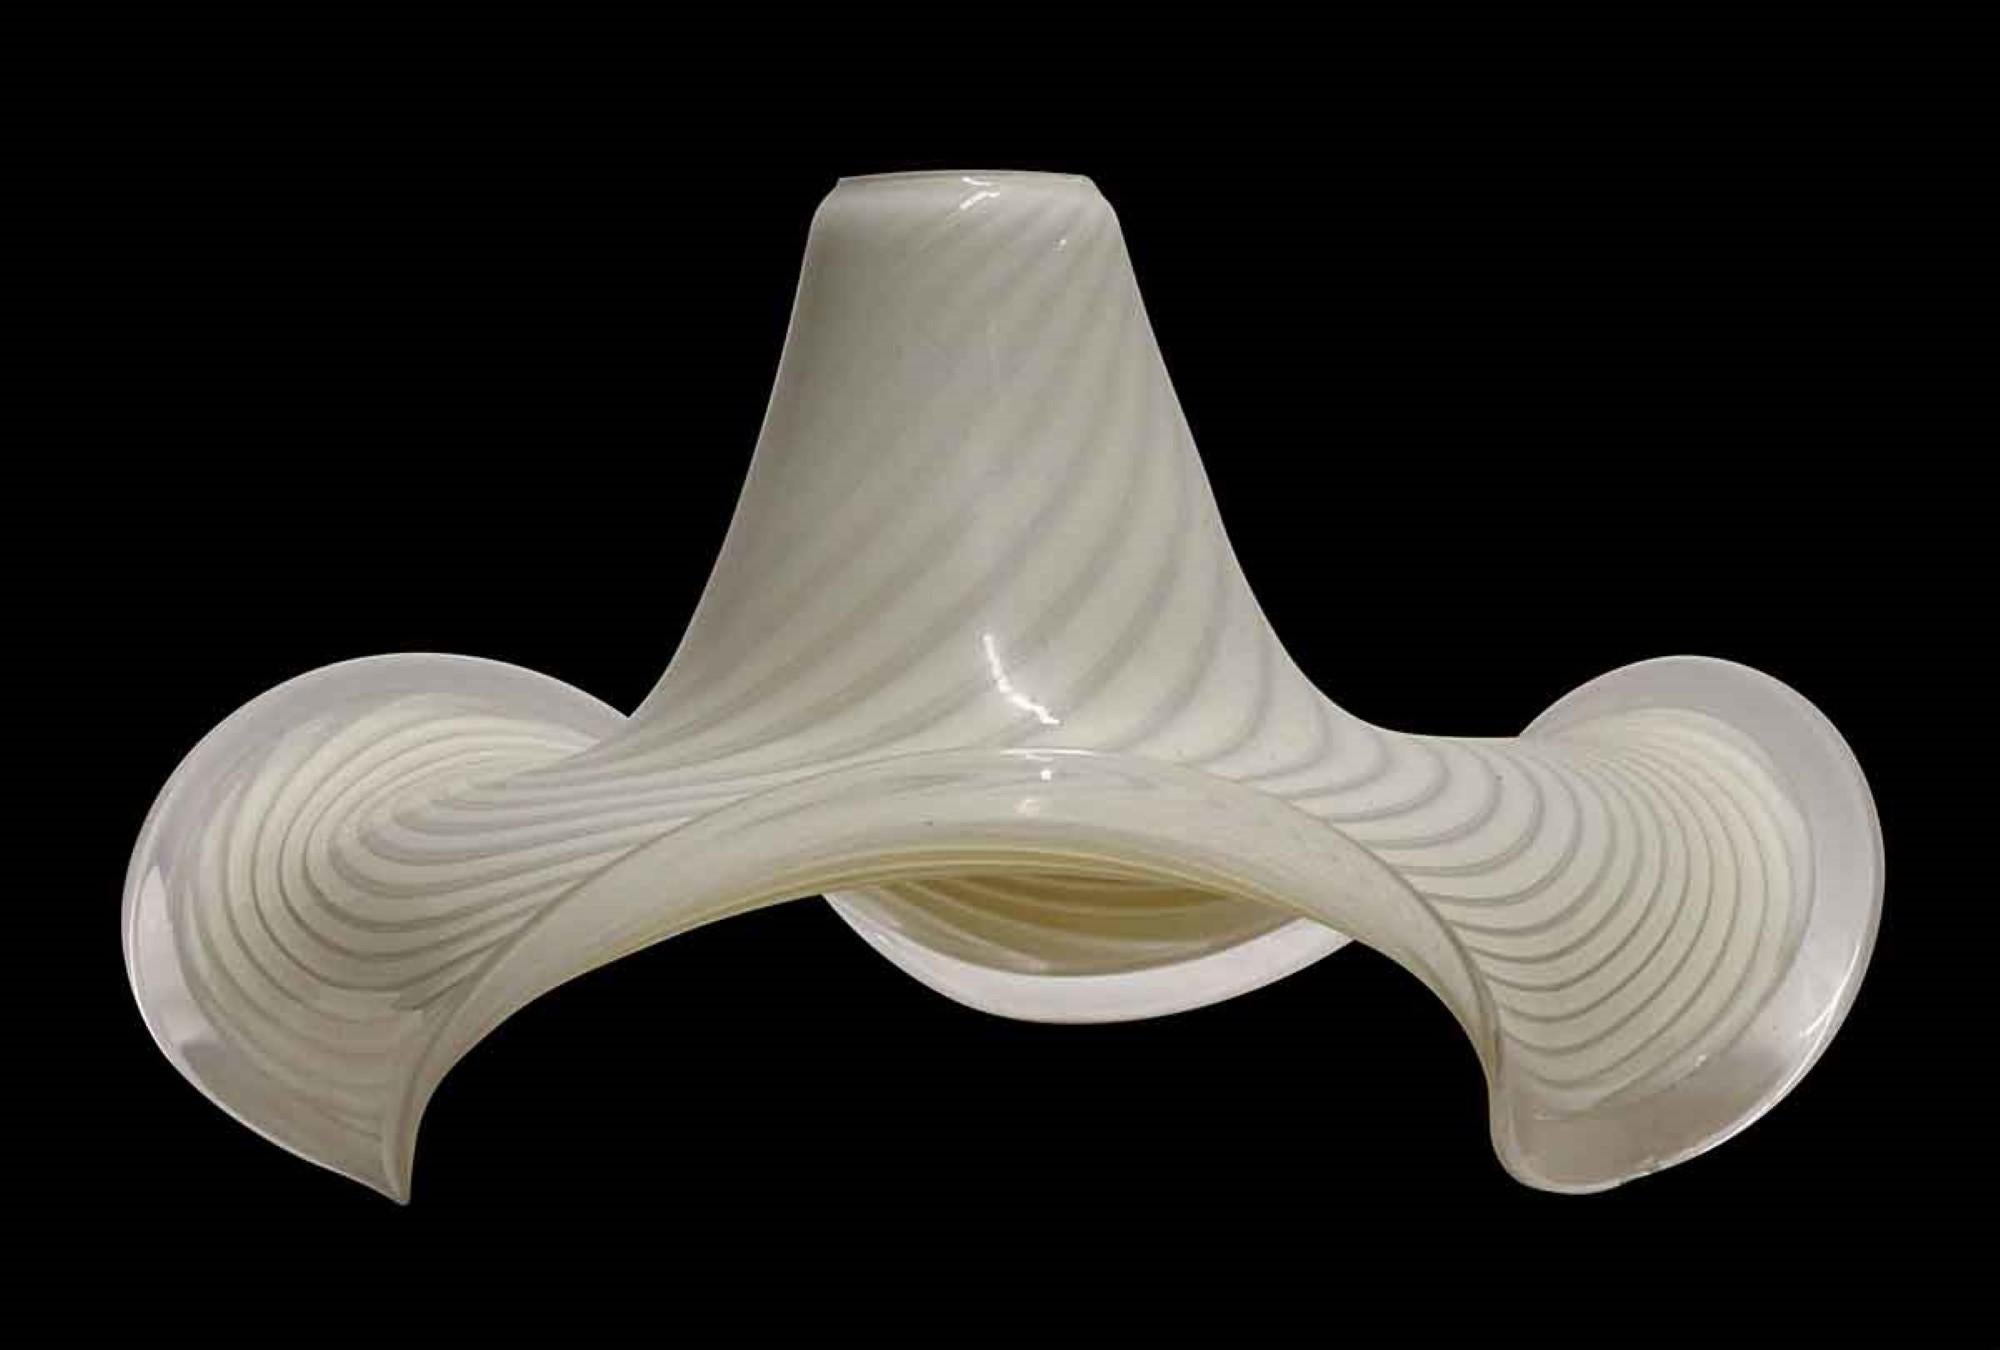 Hand blown in Italy in the 1980s, this Mid-Century Modern Murano glass shade accepts a 3.25-inch diameter fitter. This can be viewed at our Scranton, Pennsylvania location. Please inquire for the exact address.